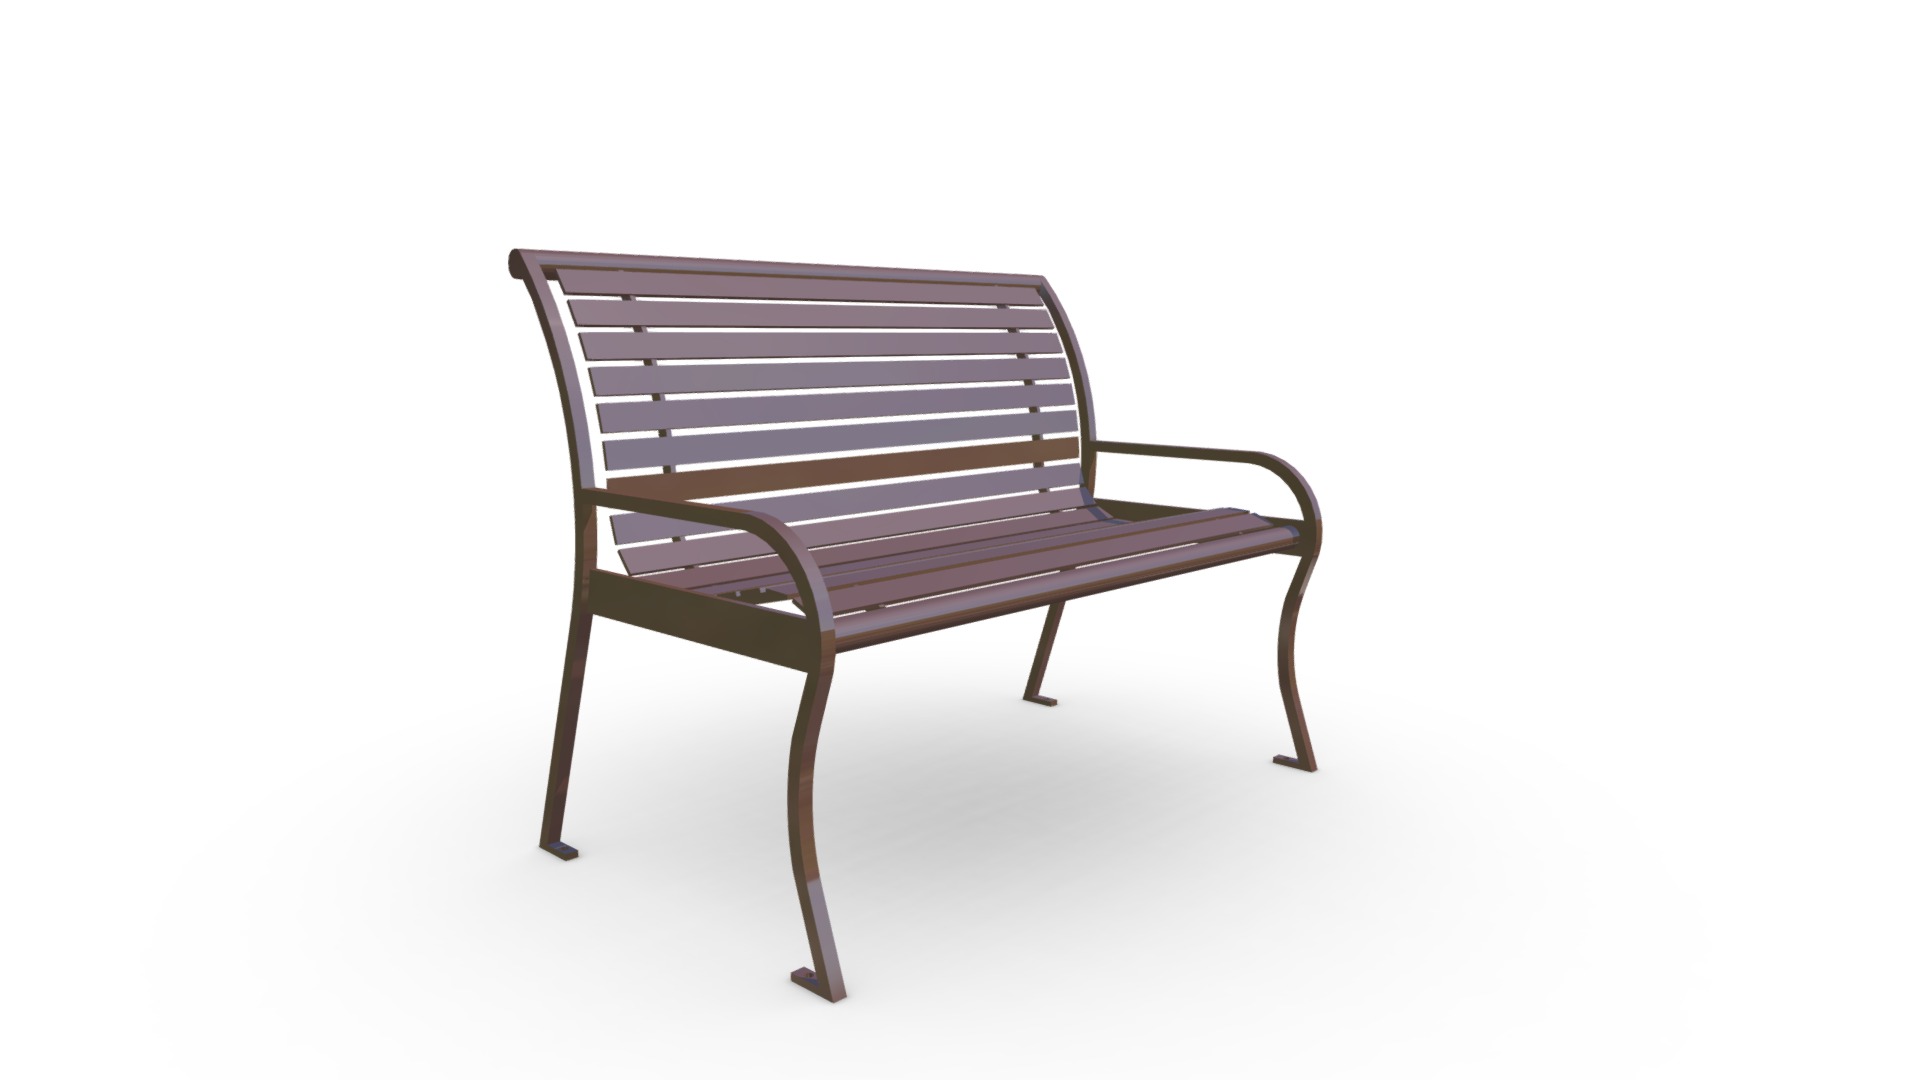 3D model SC-03.1,0 - This is a 3D model of the SC-03.1,0. The 3D model is about a bench with a seat.